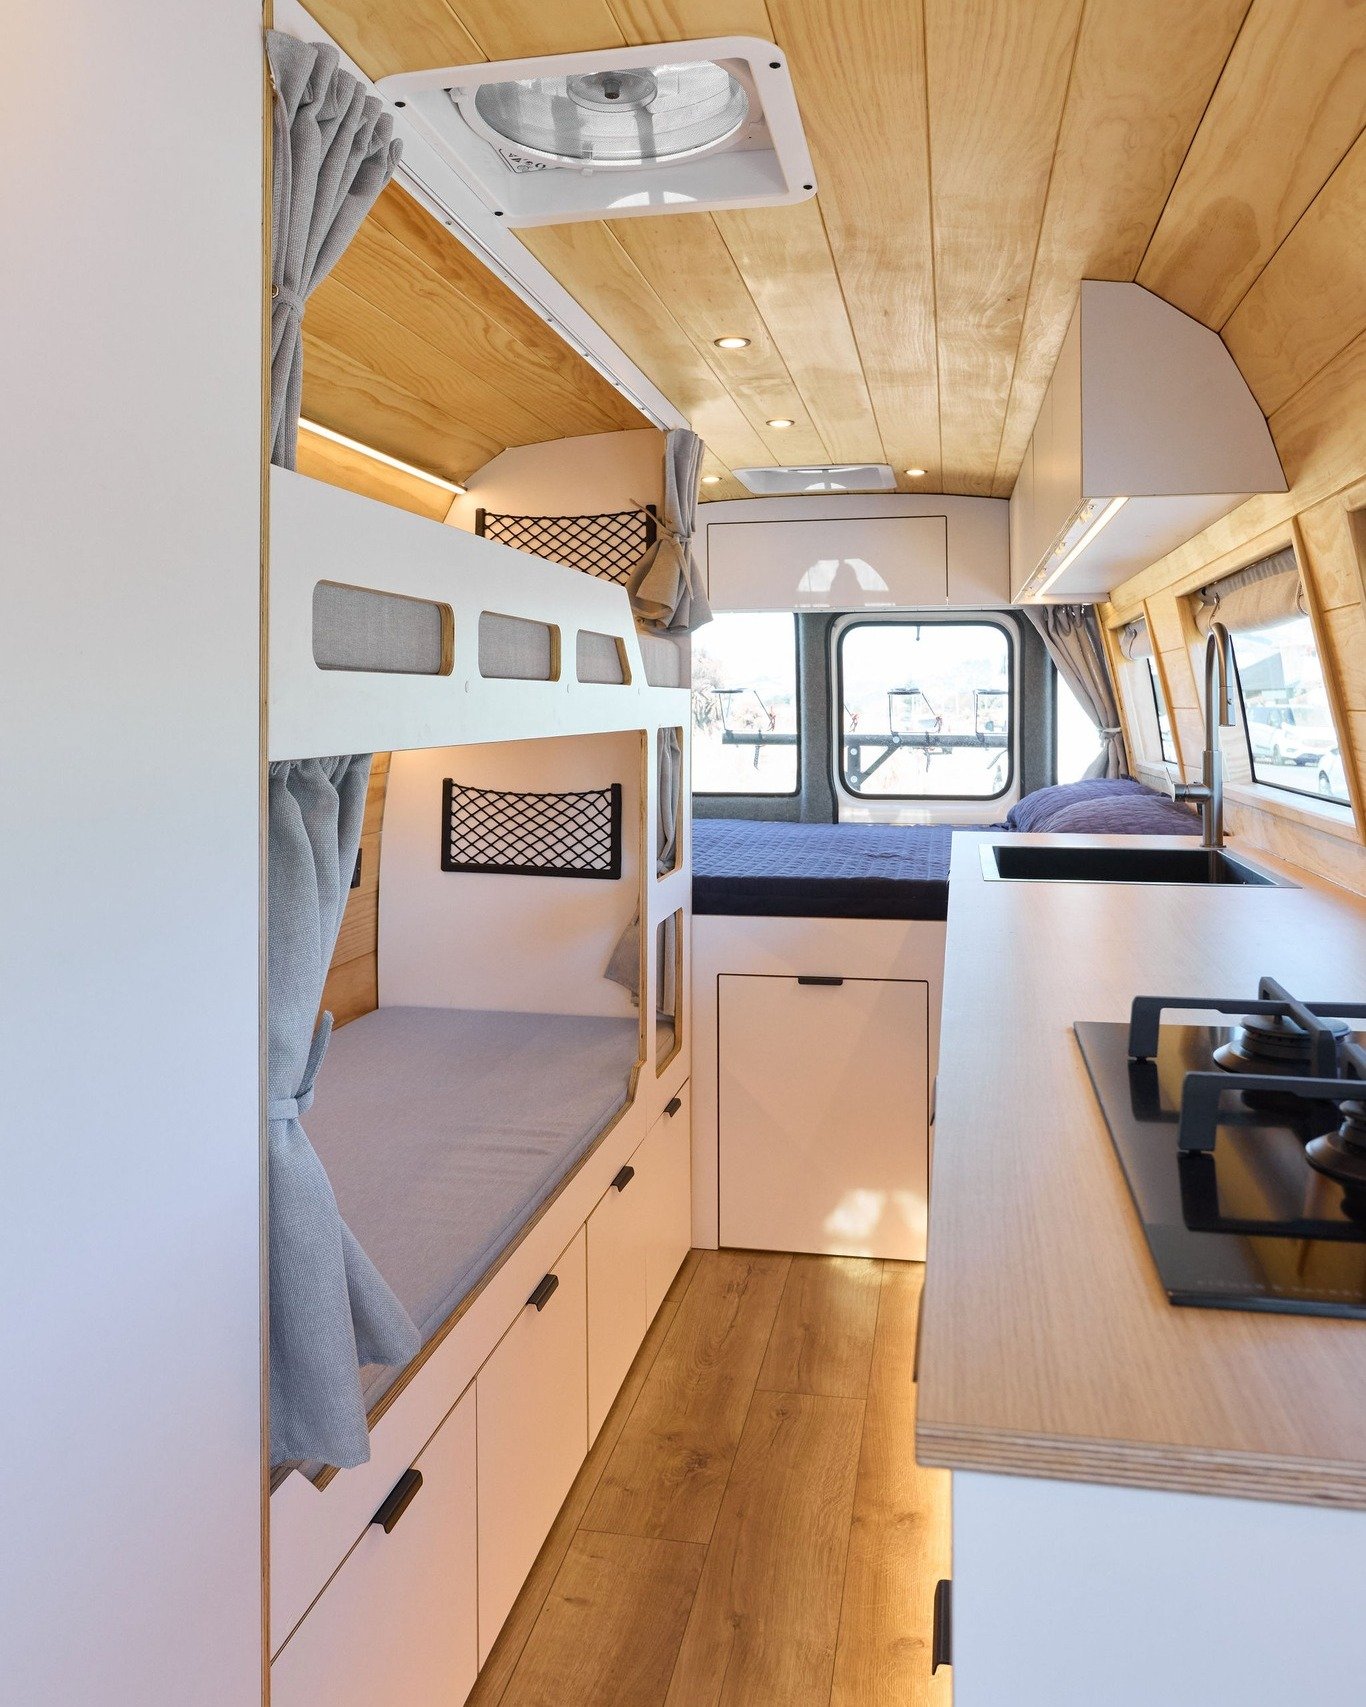 Comforts of home mean something different to everyone. Maybe it&rsquo;s a fancy showerhead, or a gas hob, or just a whole lotta natural light streaming in through the windows. Either way, when we converted Bridget&rsquo;s Toyota Coaster, we wanted to